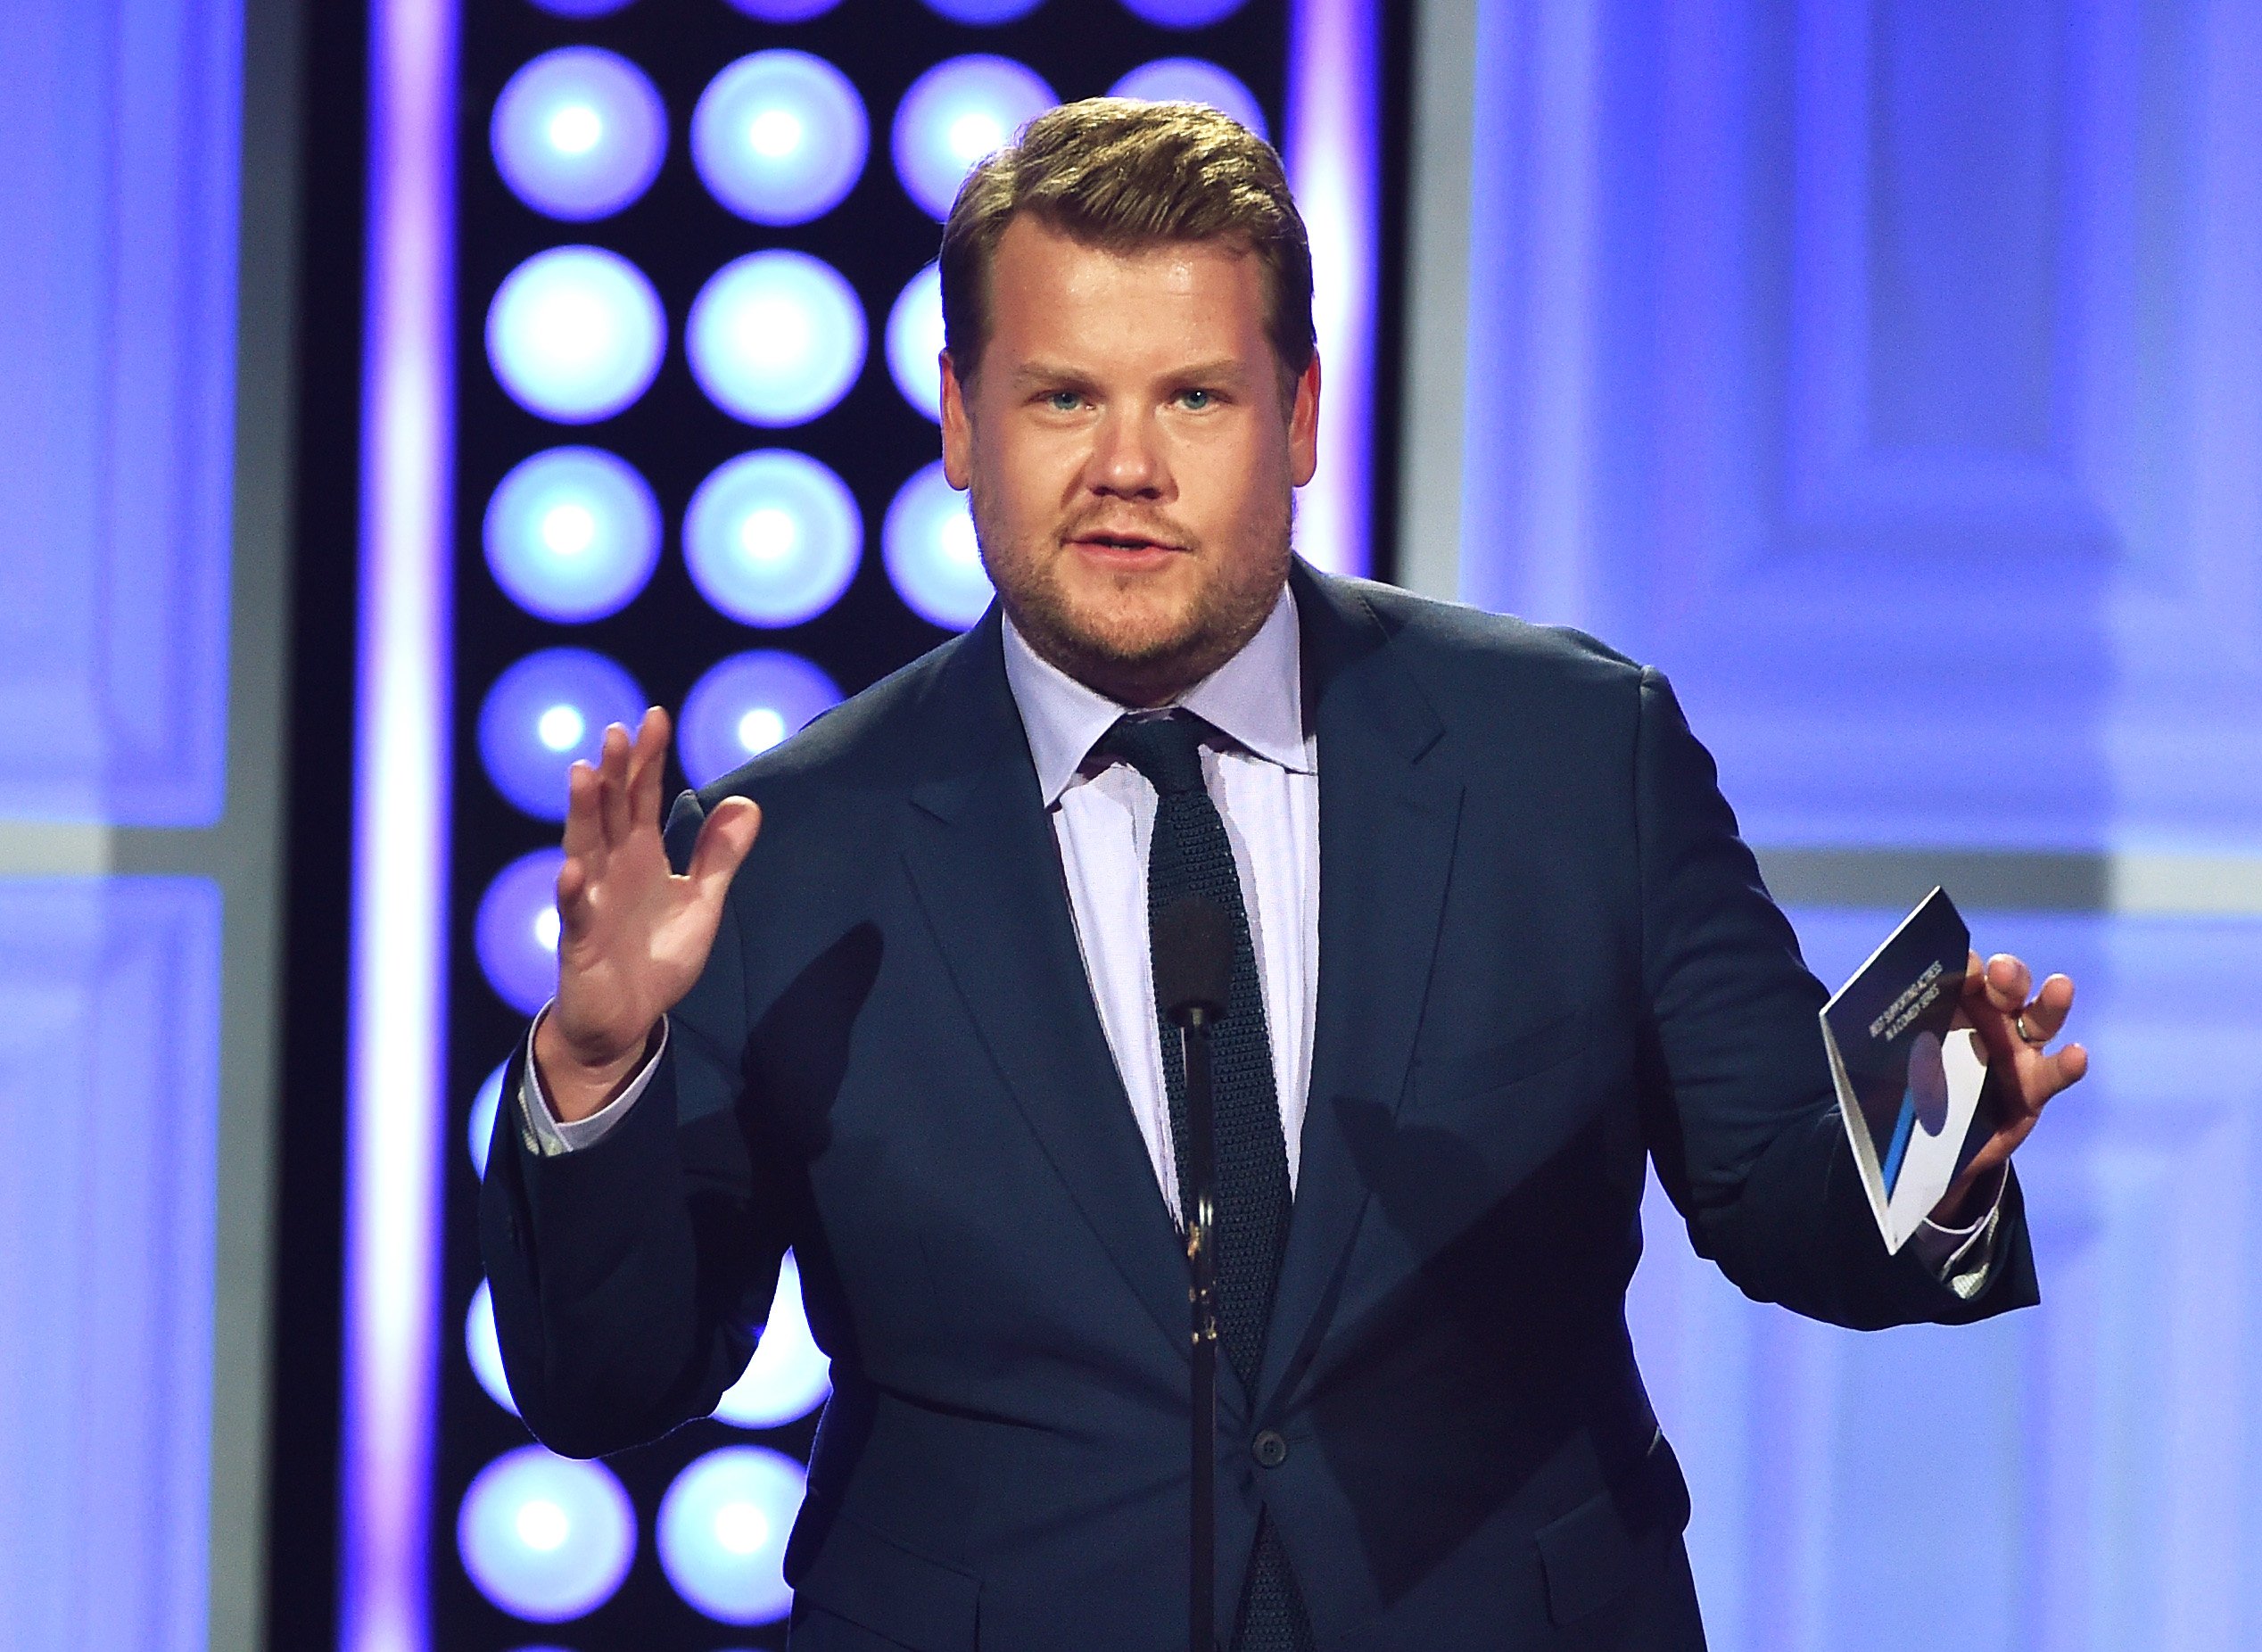 'The Late Late Show' host James Corden in 2015 speaking onstage at the 5th Annual Critics' Choice Television Awards